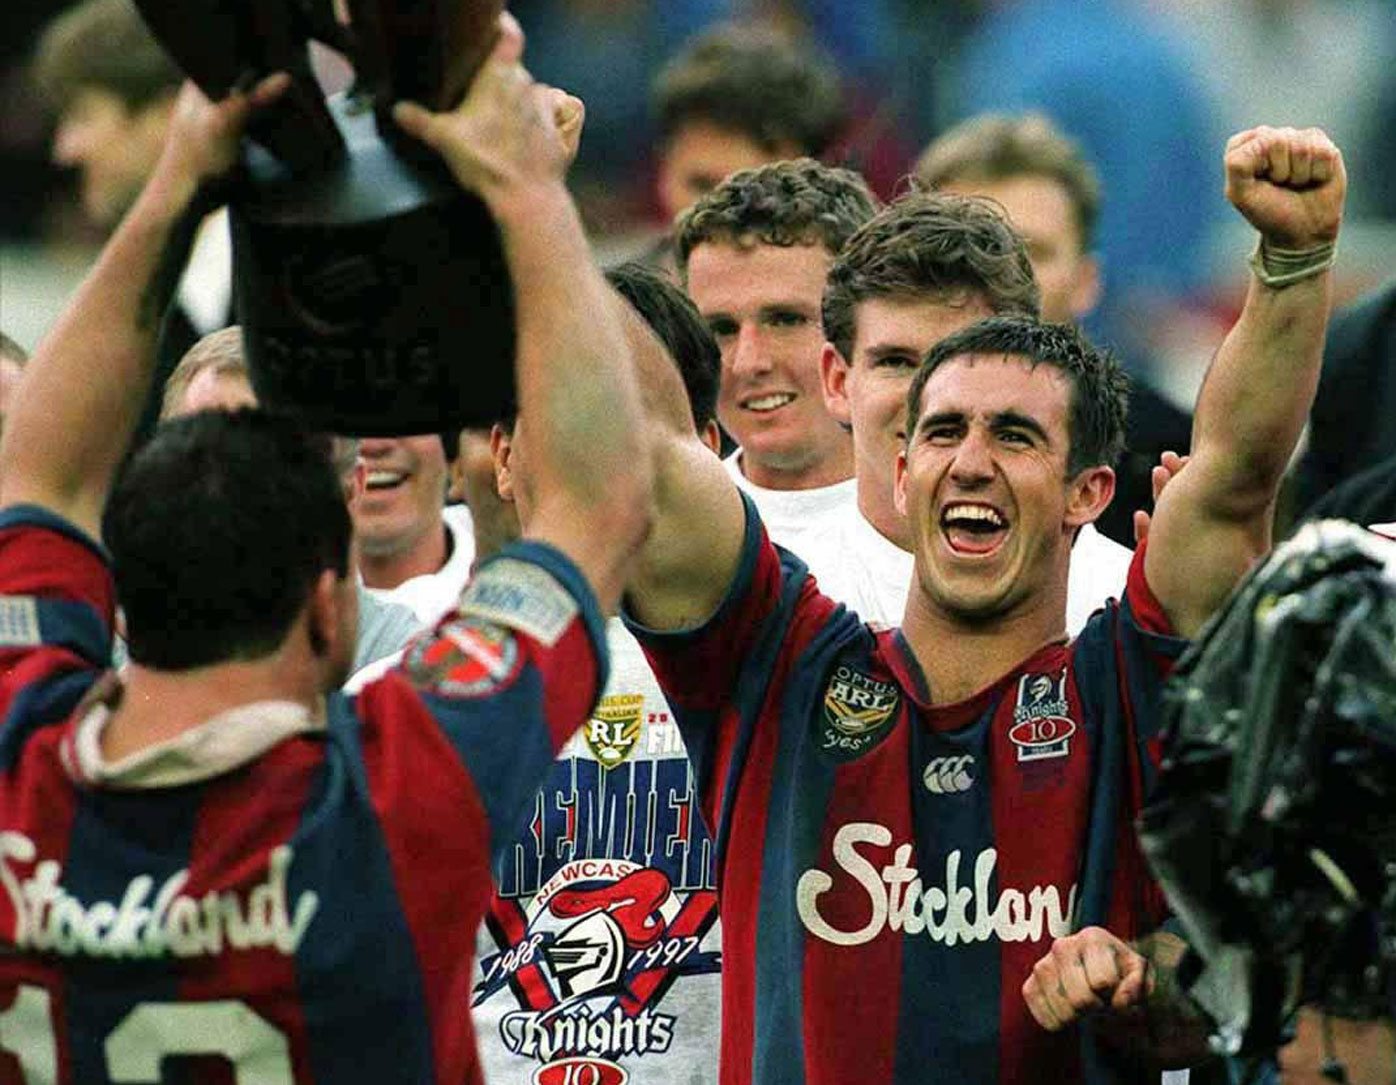 Stockland - Stockland sponsors The Newcastle Knights in 1997.